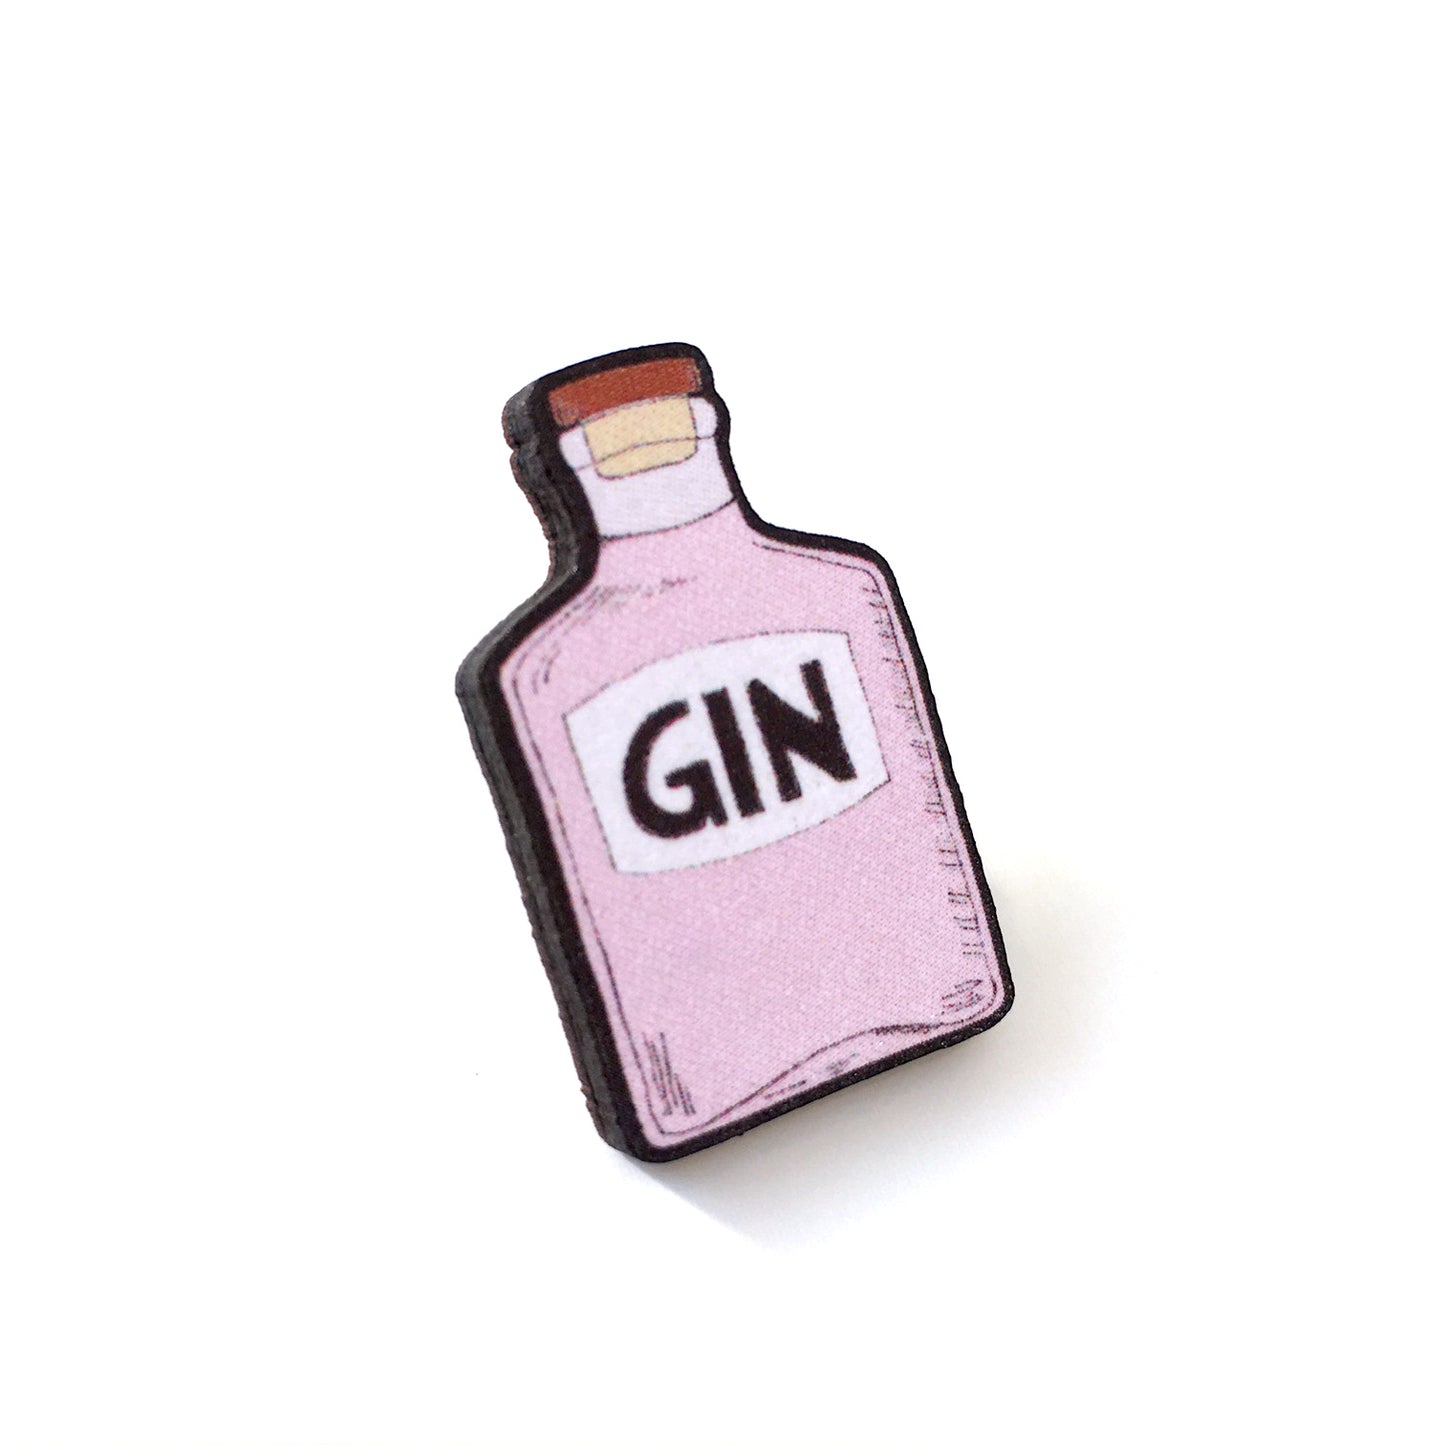 Pink gin bottle pin - Quirky gin lover gift